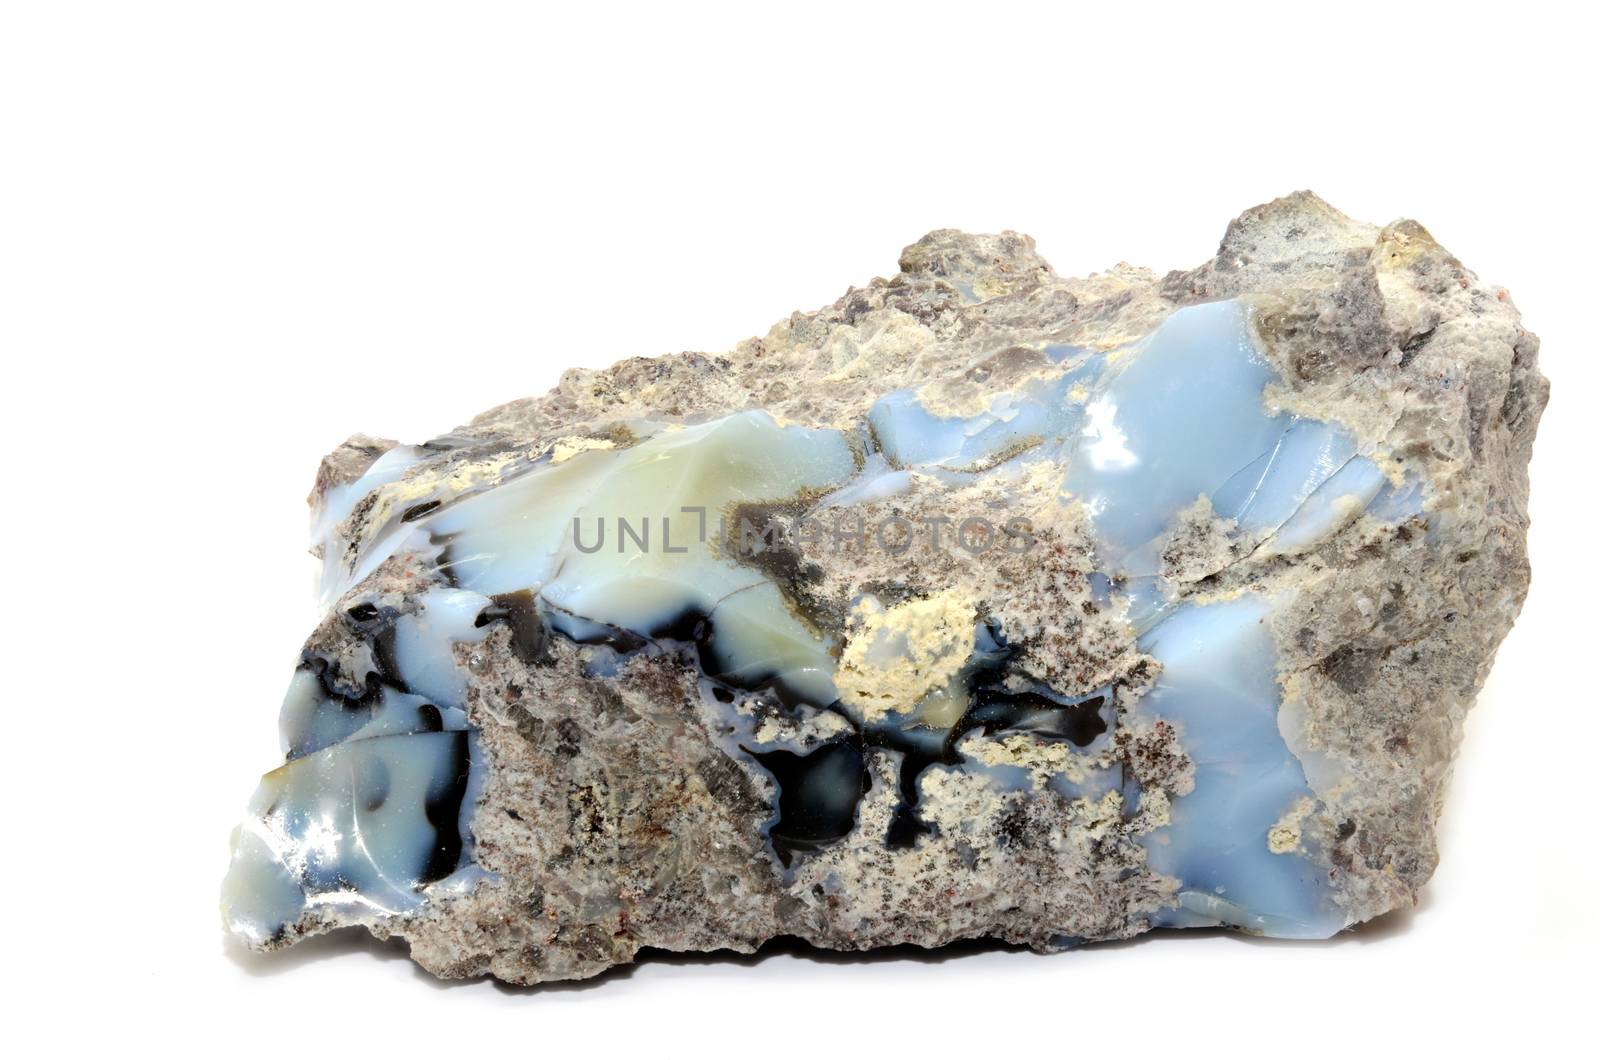 Sample of a beautiful Blue Opal nature specimen isolated on white background